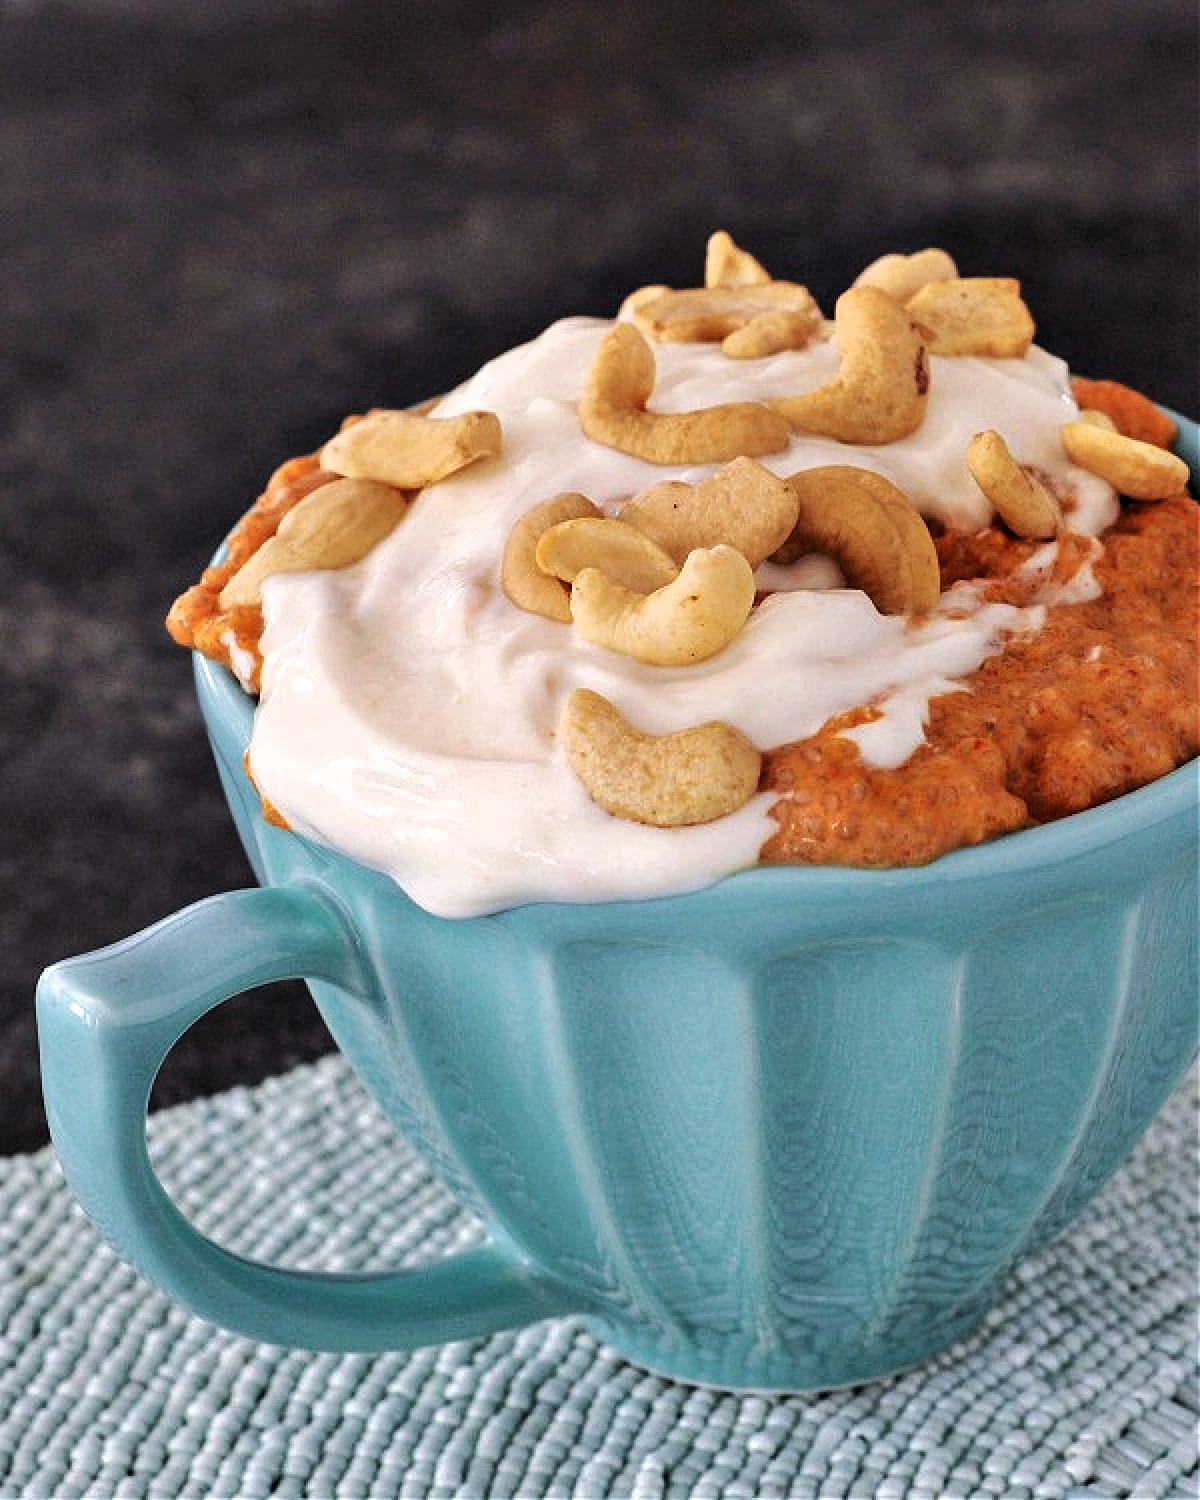 Savory red curry chia pudding and cashew cream, topped with cashews, served in a teal mug.